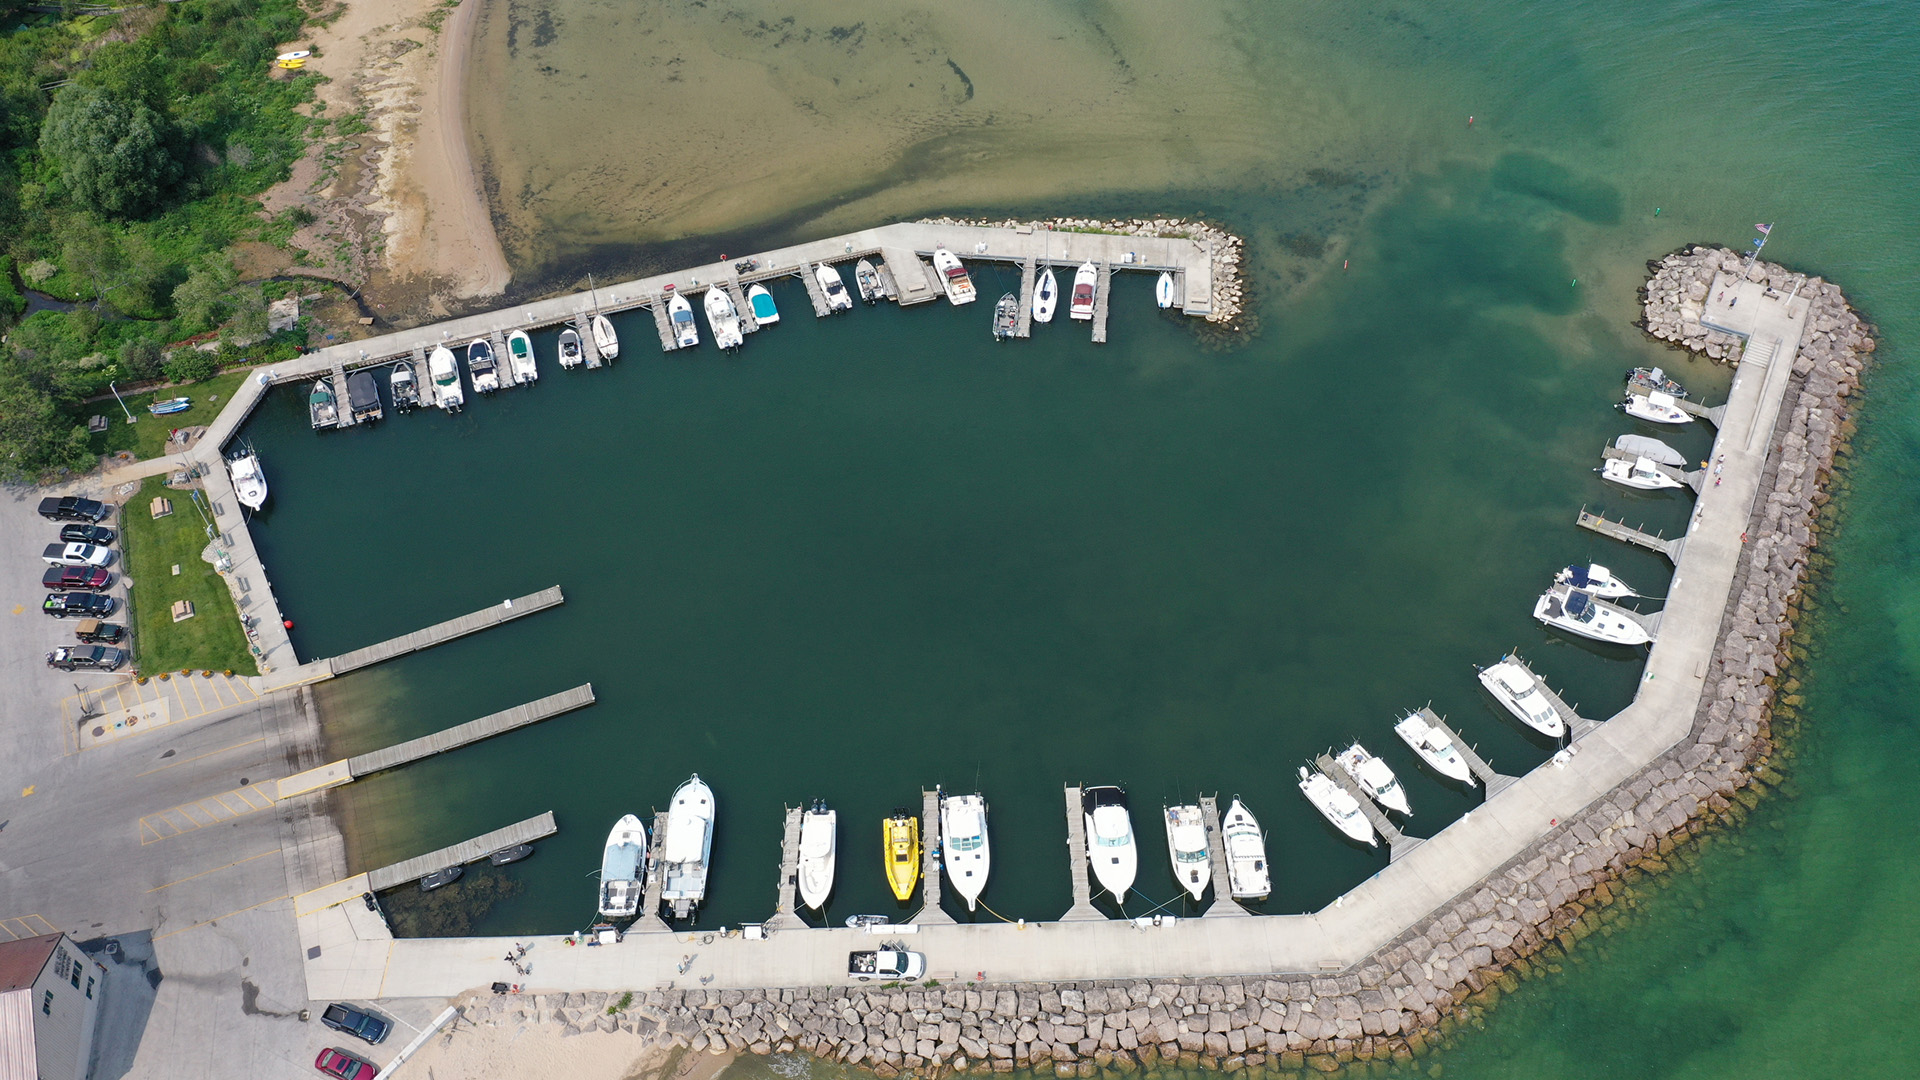 An aerial photo shows personal boats docked on piers on the inside of a ringed harbor surrounded by stacked boulders.